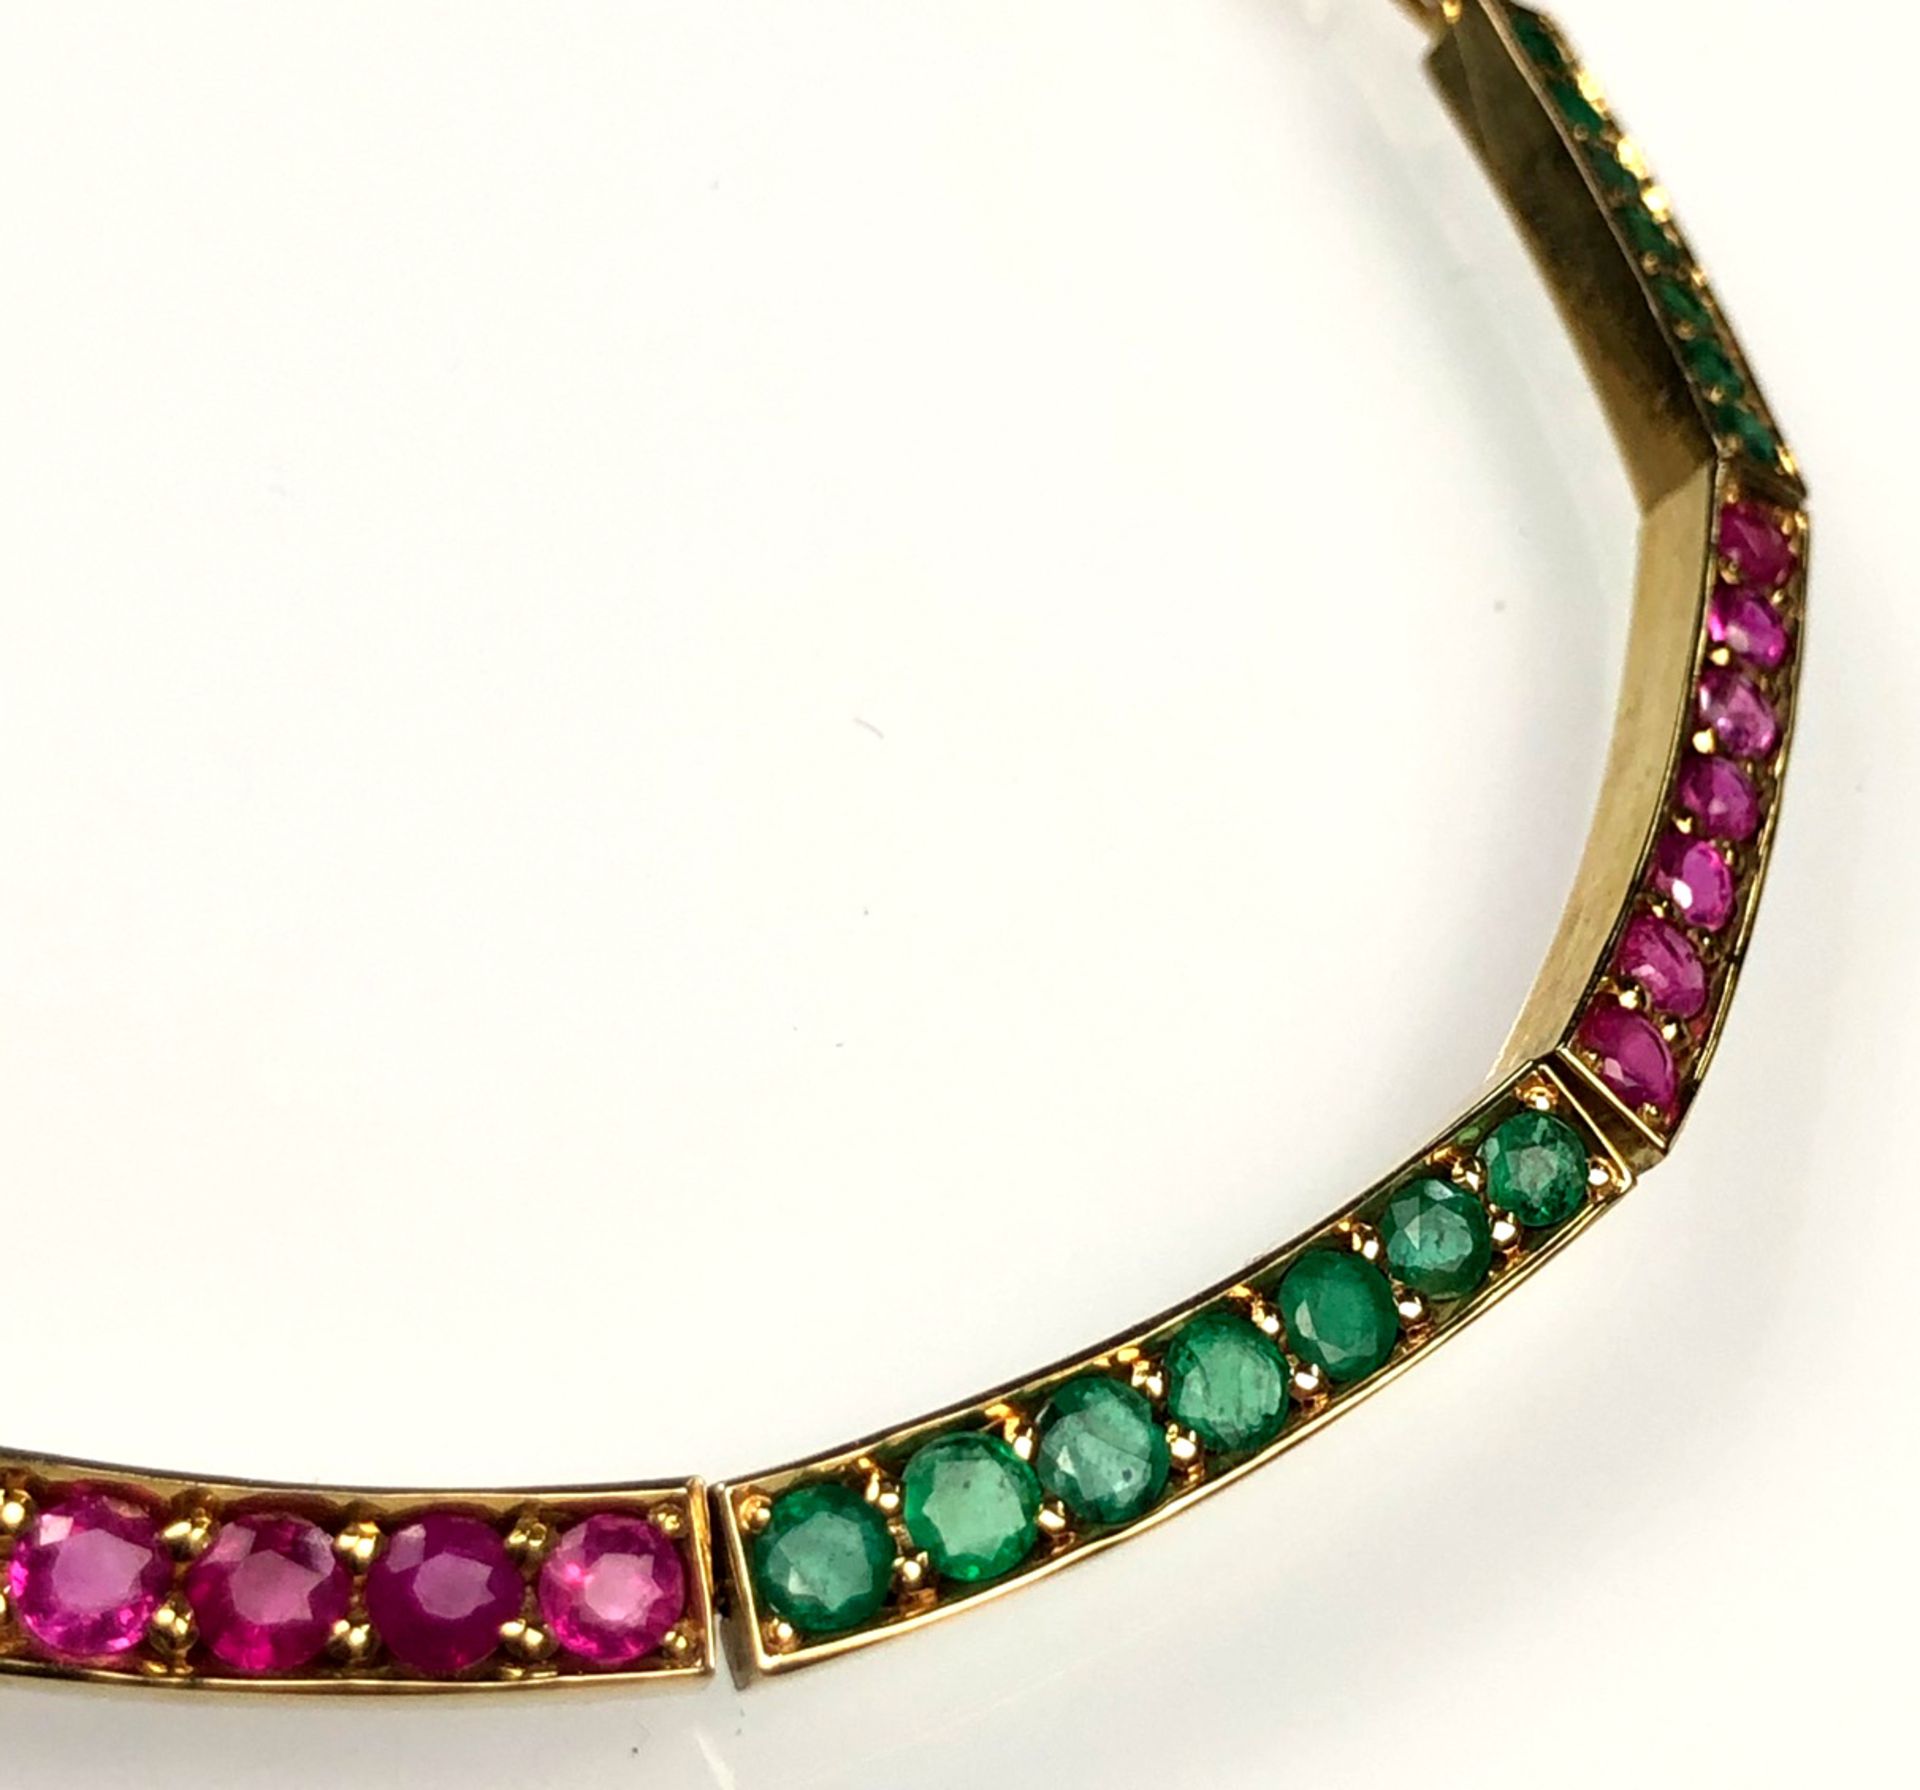 Collier yellow gold 750. With sapphires and rubies. - Image 8 of 12